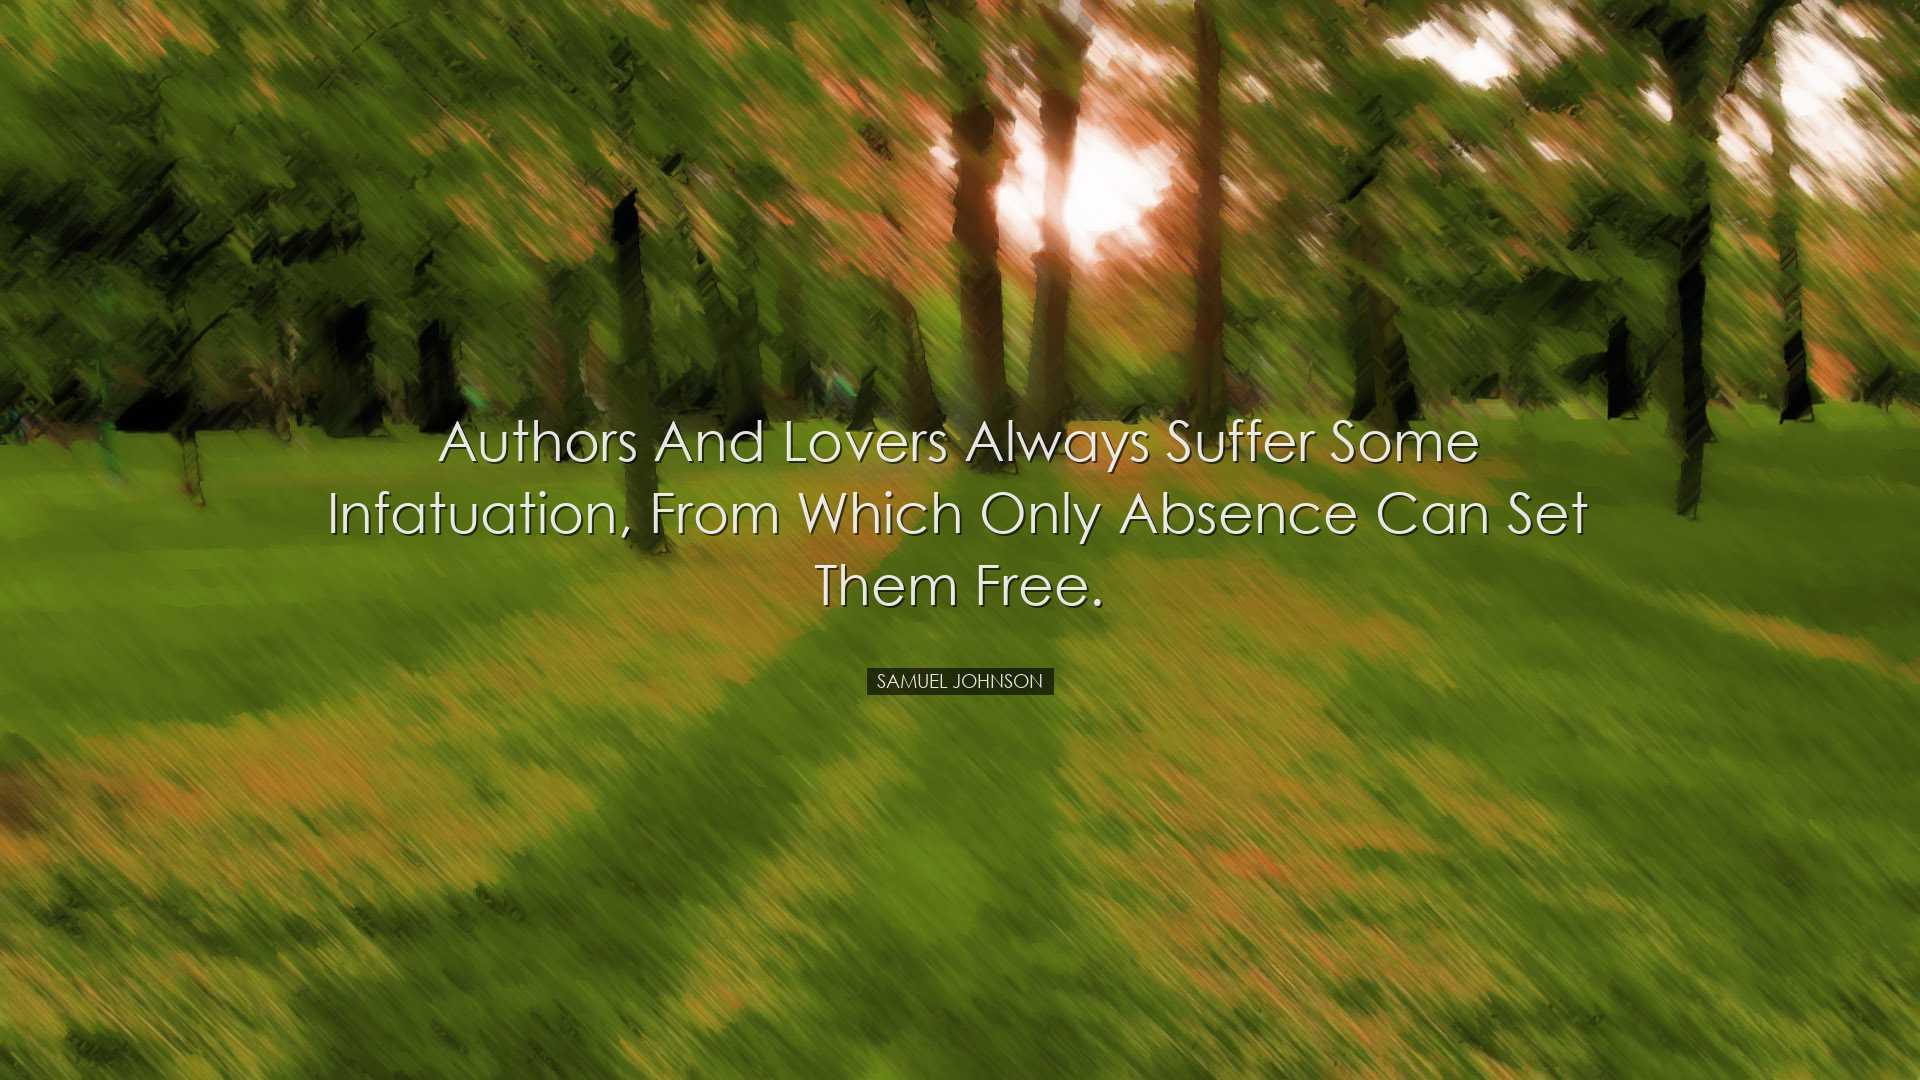 Authors and lovers always suffer some infatuation, from which only